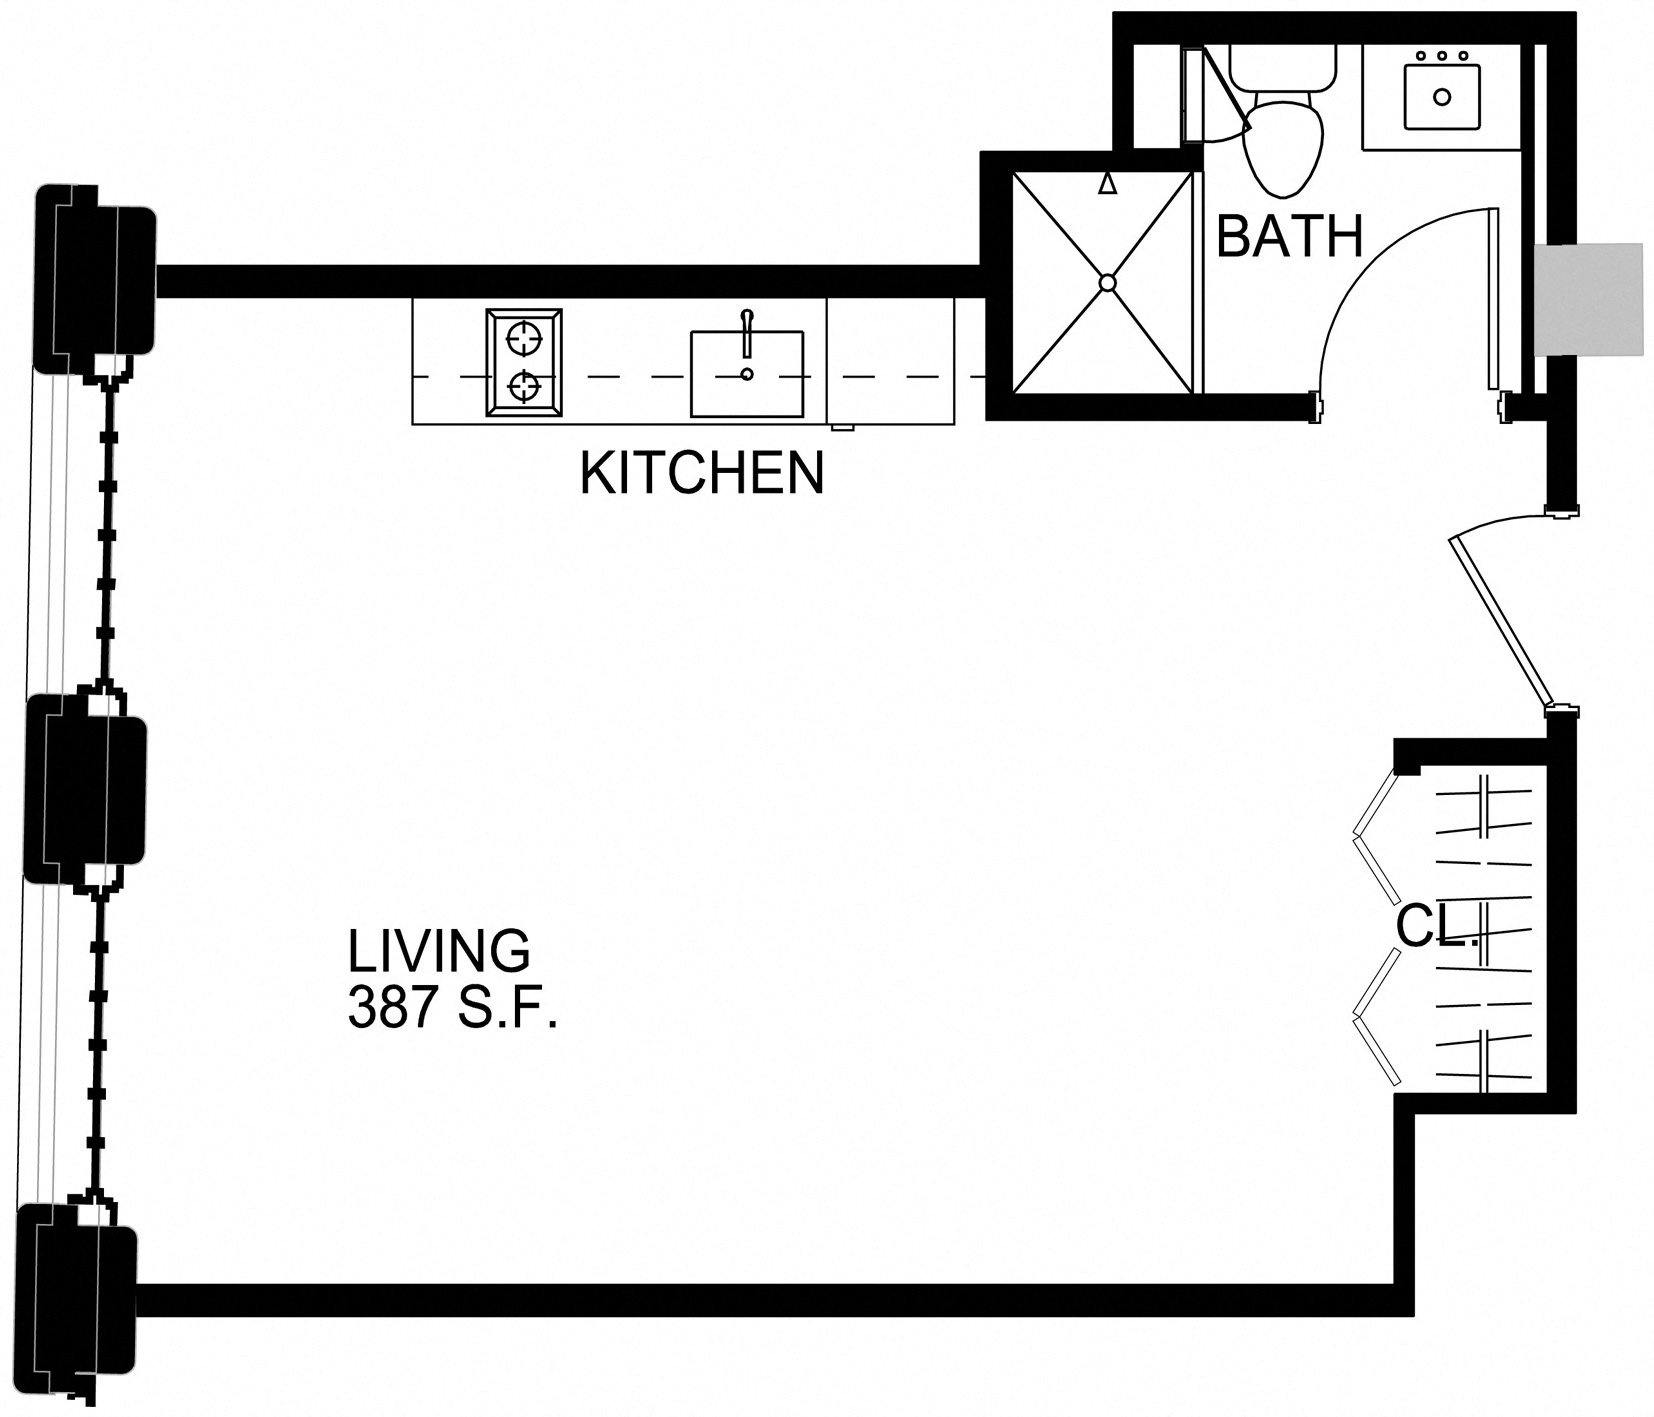 Floorplan for Apartment #S2603, 0 bedroom unit at Halstead Providence